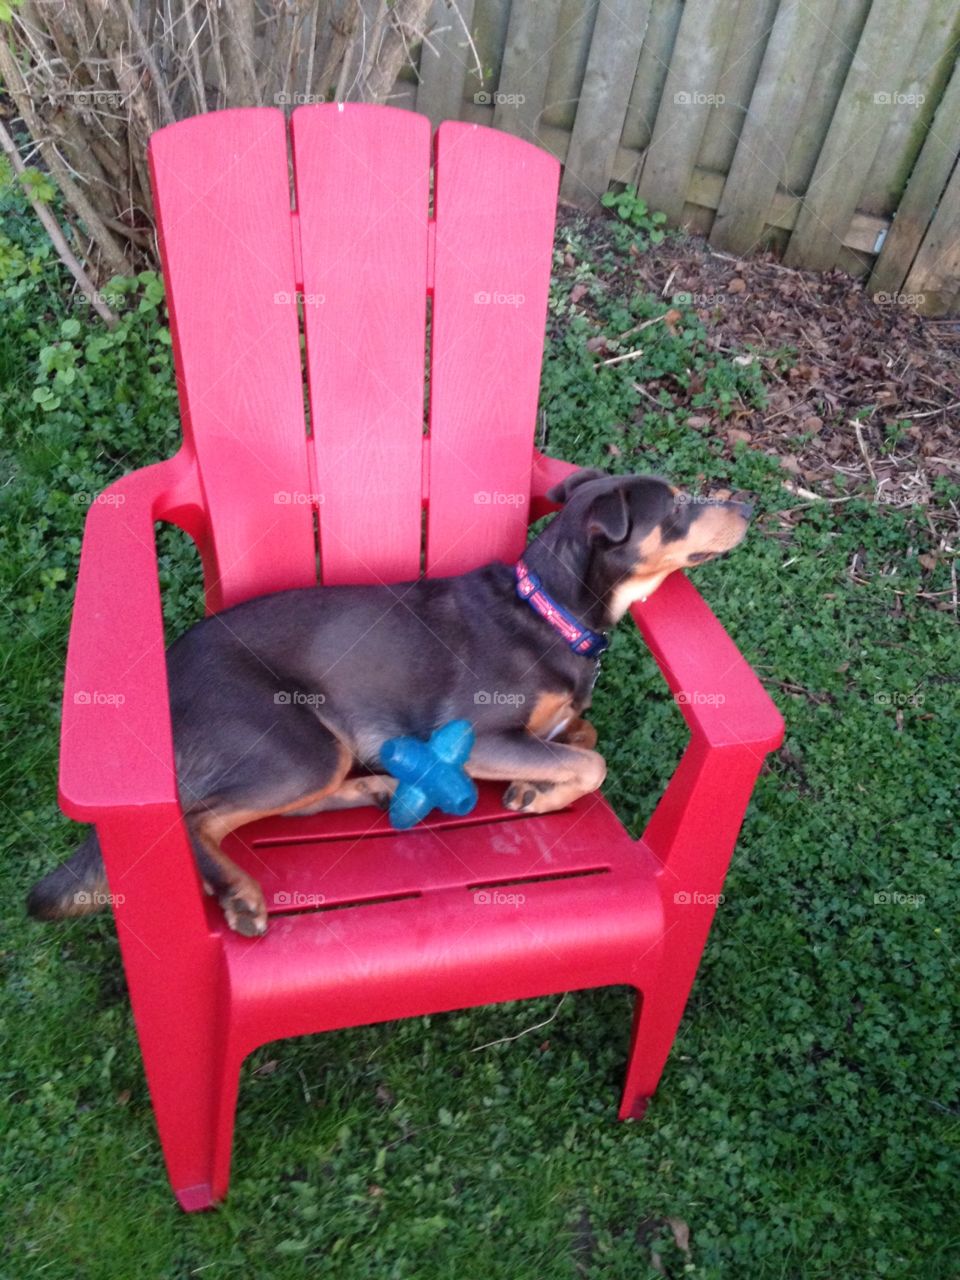 Cute dog sitting in master's red plastic garden patio chair with blue rubber chew toy.